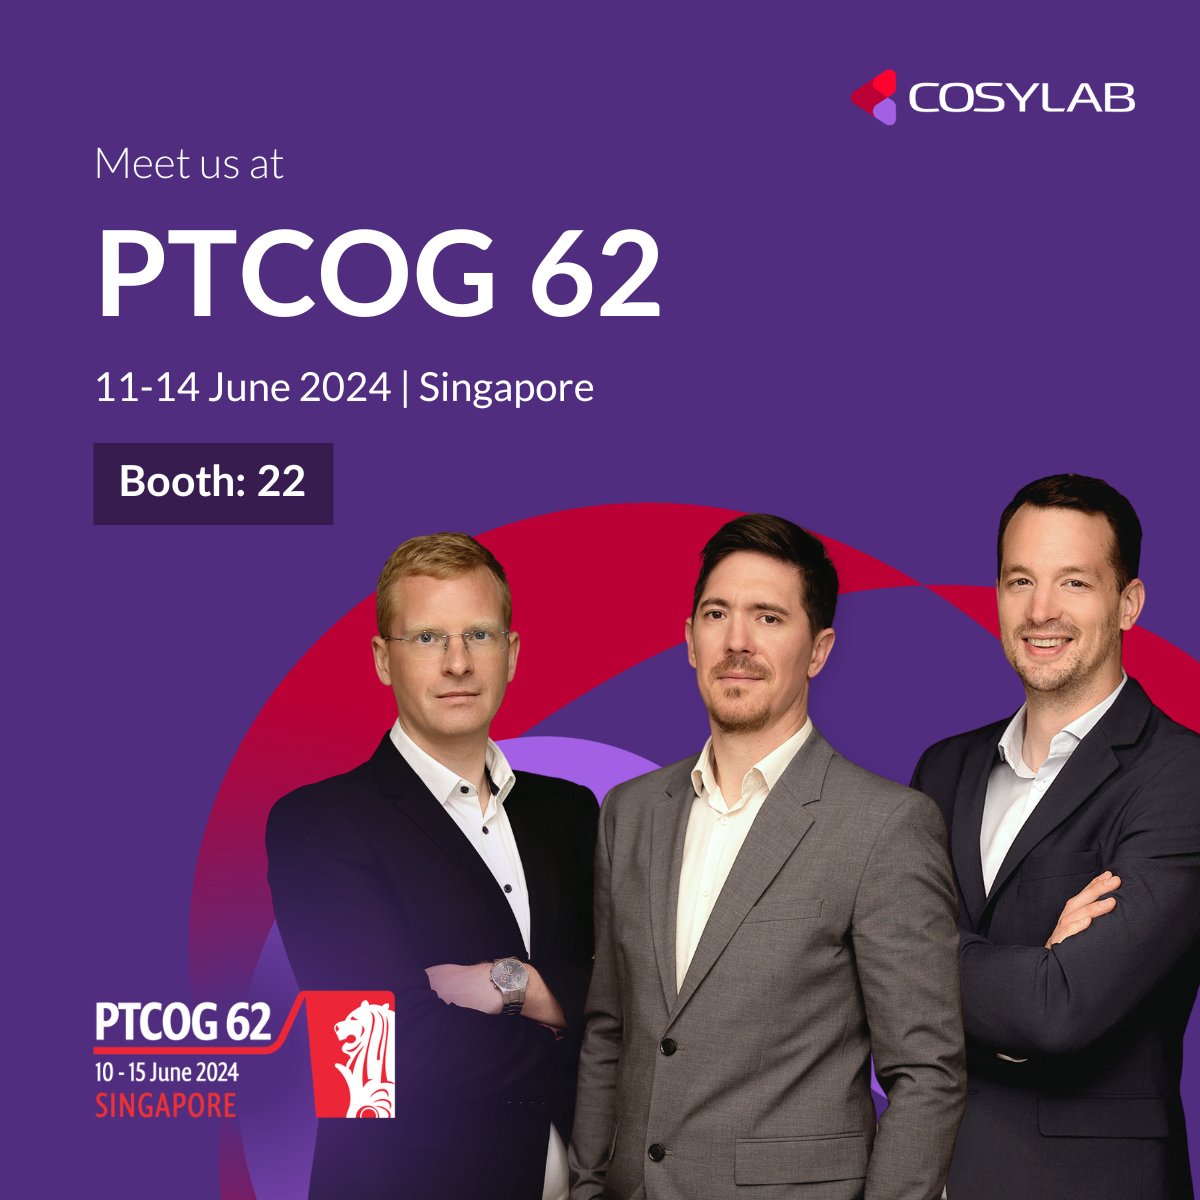 🇸🇬 Meet us at the 62nd #PTCOG conference during 11-14 June 2024 at booth 22. Looking forward to discussing Cosylab's OncologyOne™ functionalities for particle therapy. Read more: hubs.ly/Q02ytYl60
#particletherapy #oncology #radiotherapy #singapore